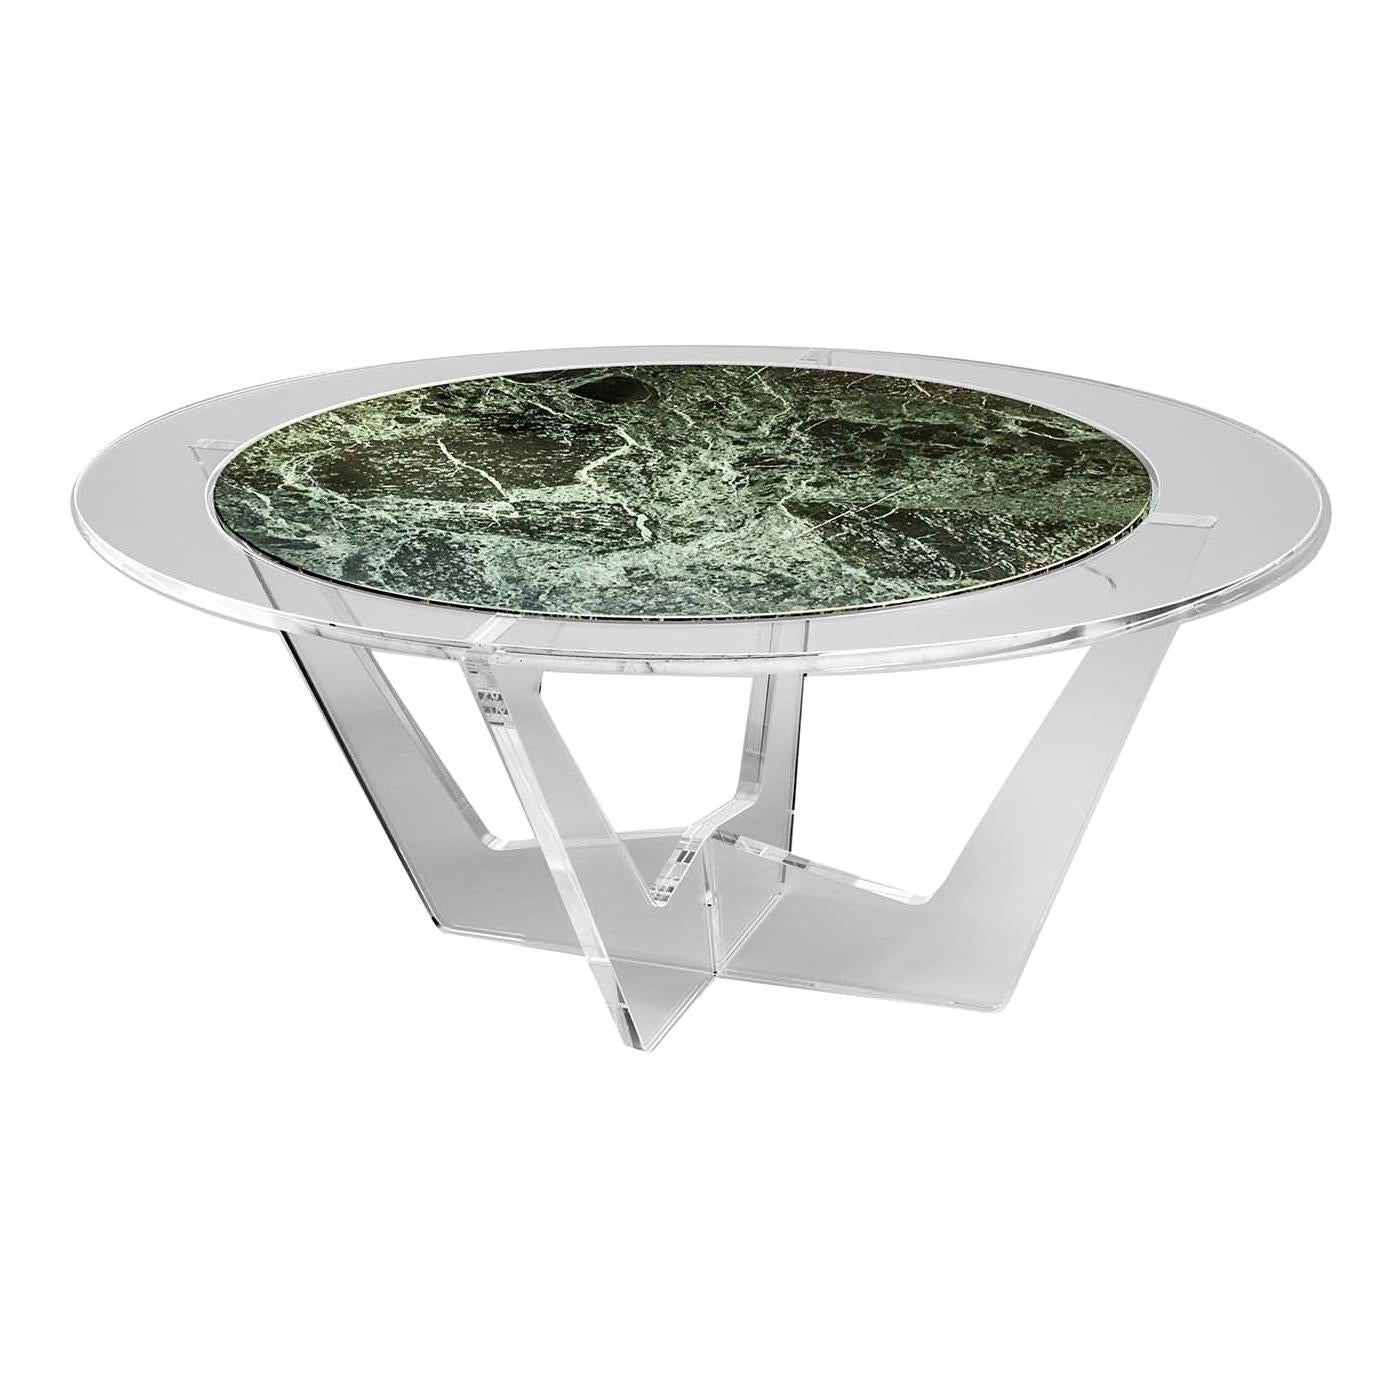 Hac Oval Coffee Table with Green Alps Marble Top by Madea Milano